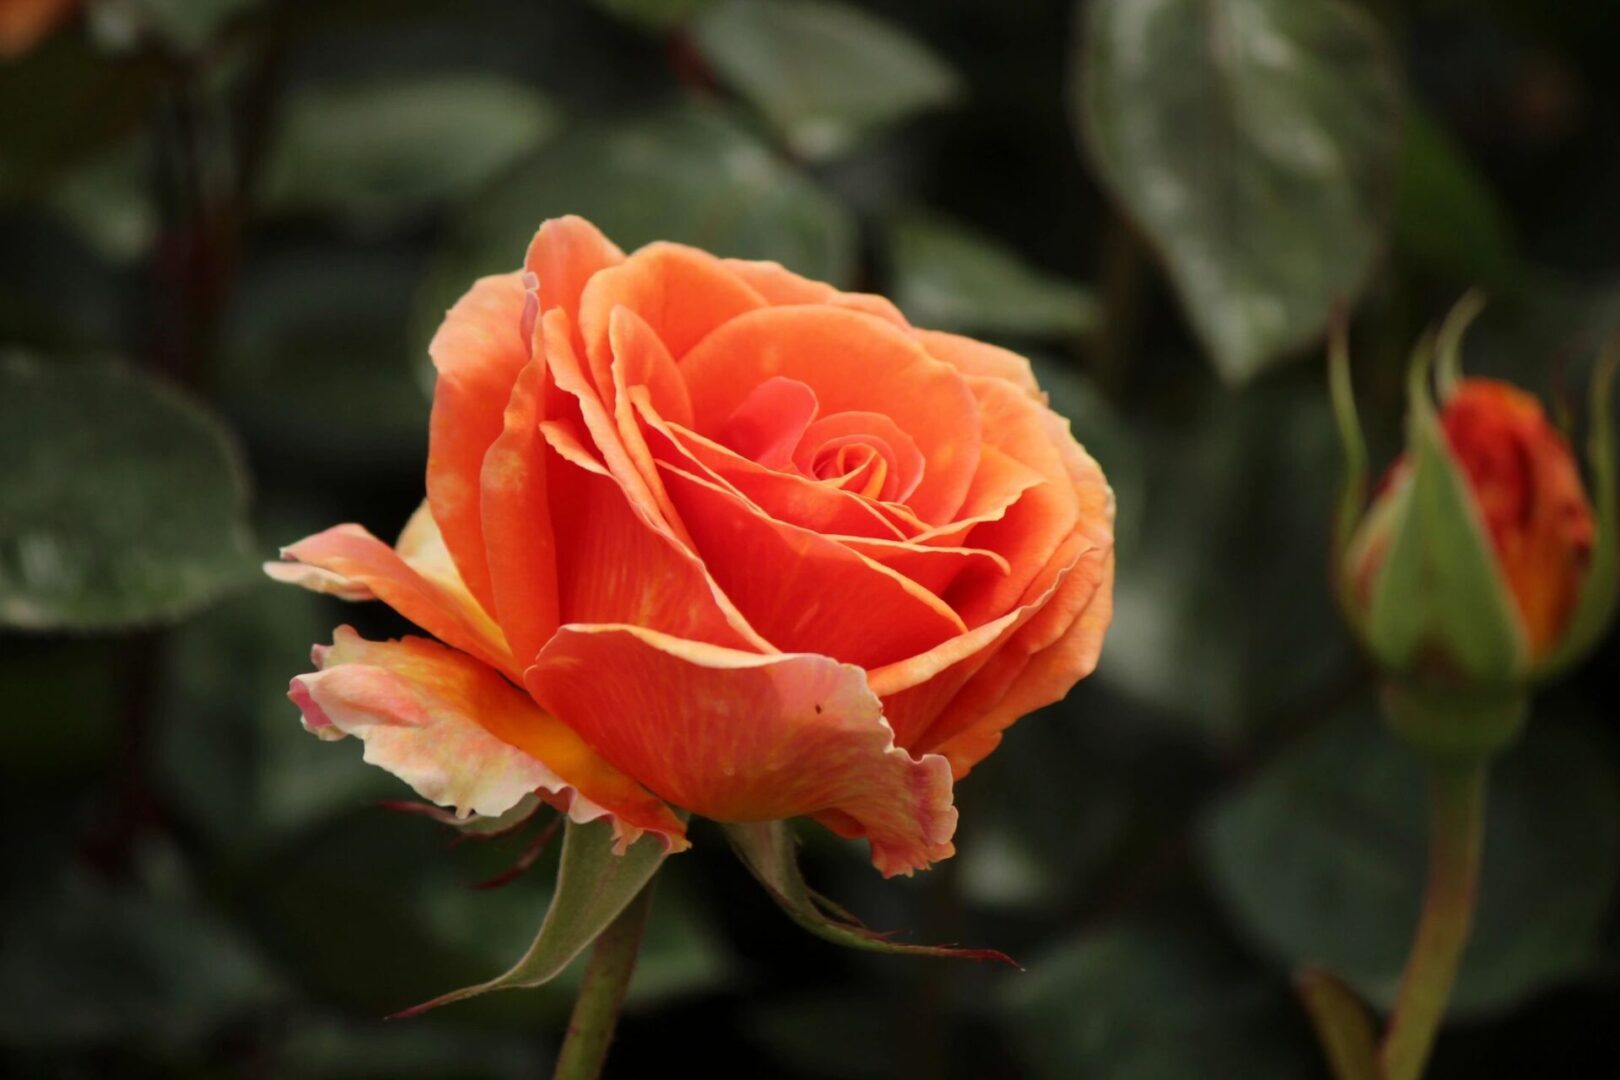 An orange rose is blooming in a garden.